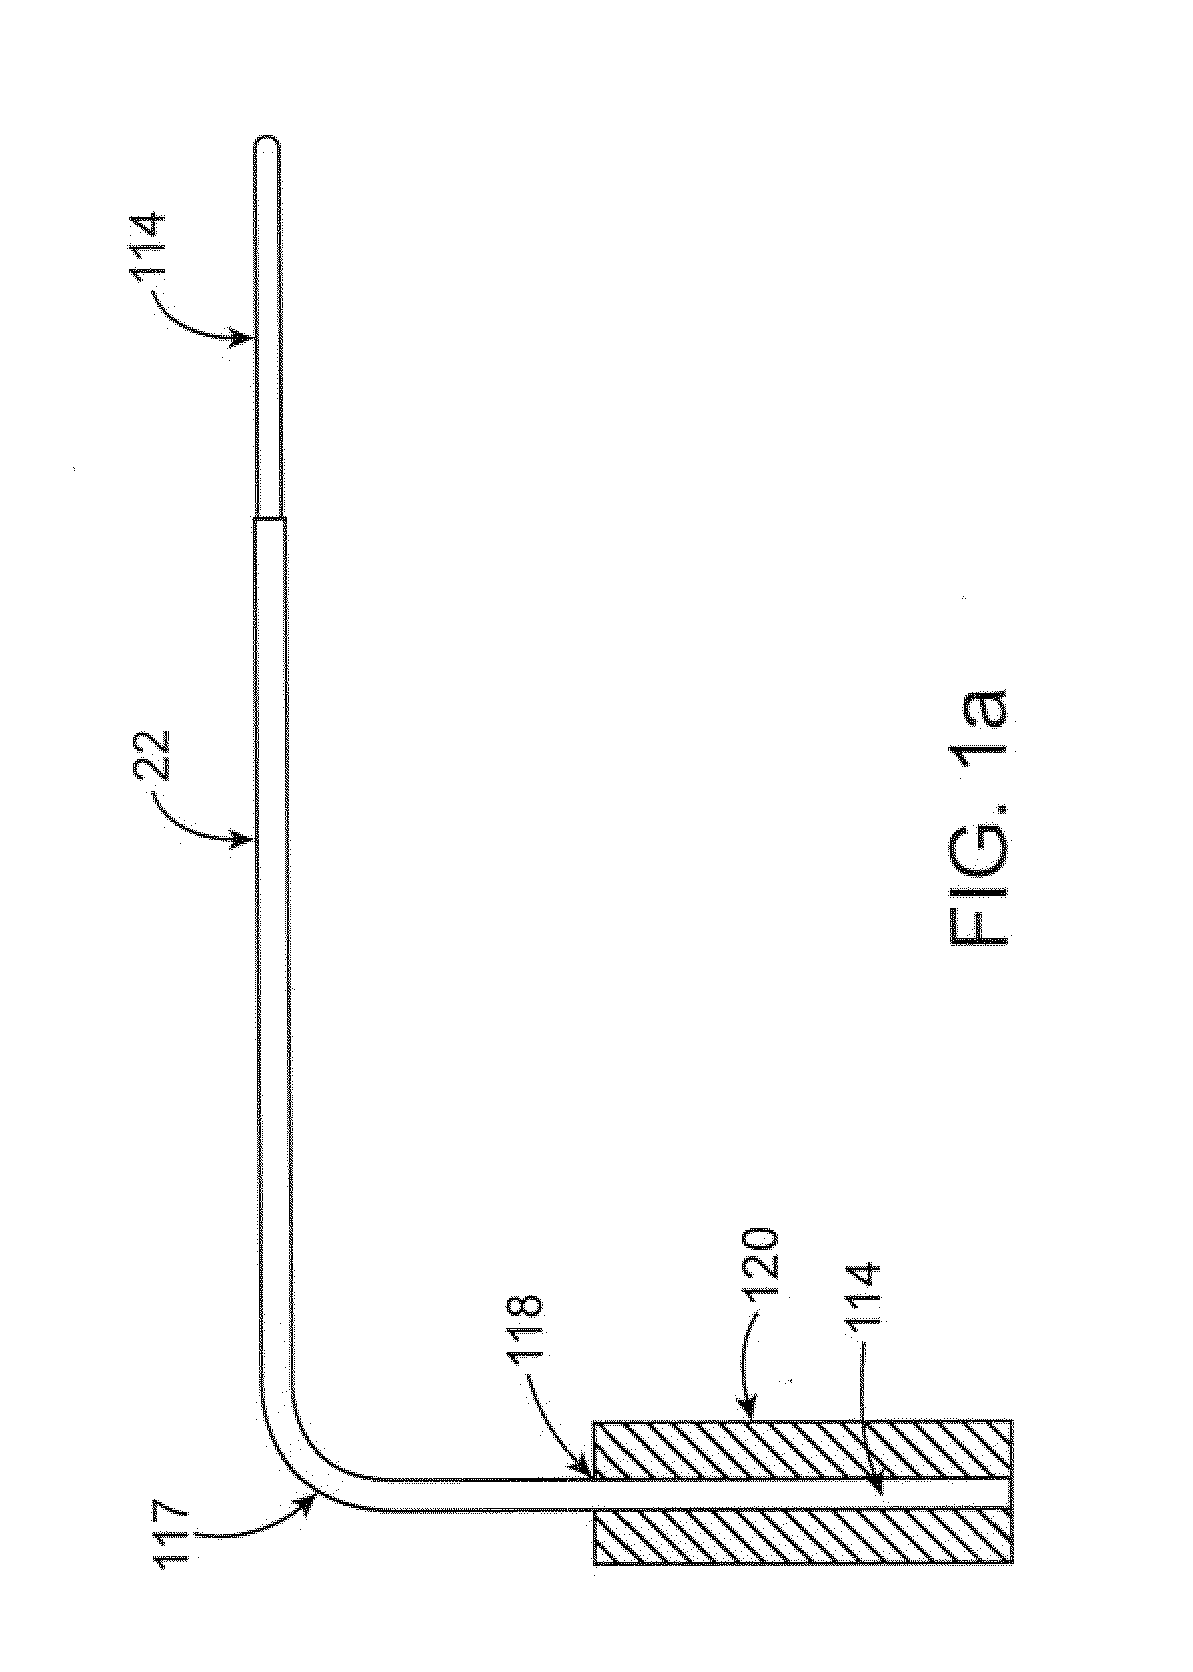 Ultrasound catheter and methods for making and using same